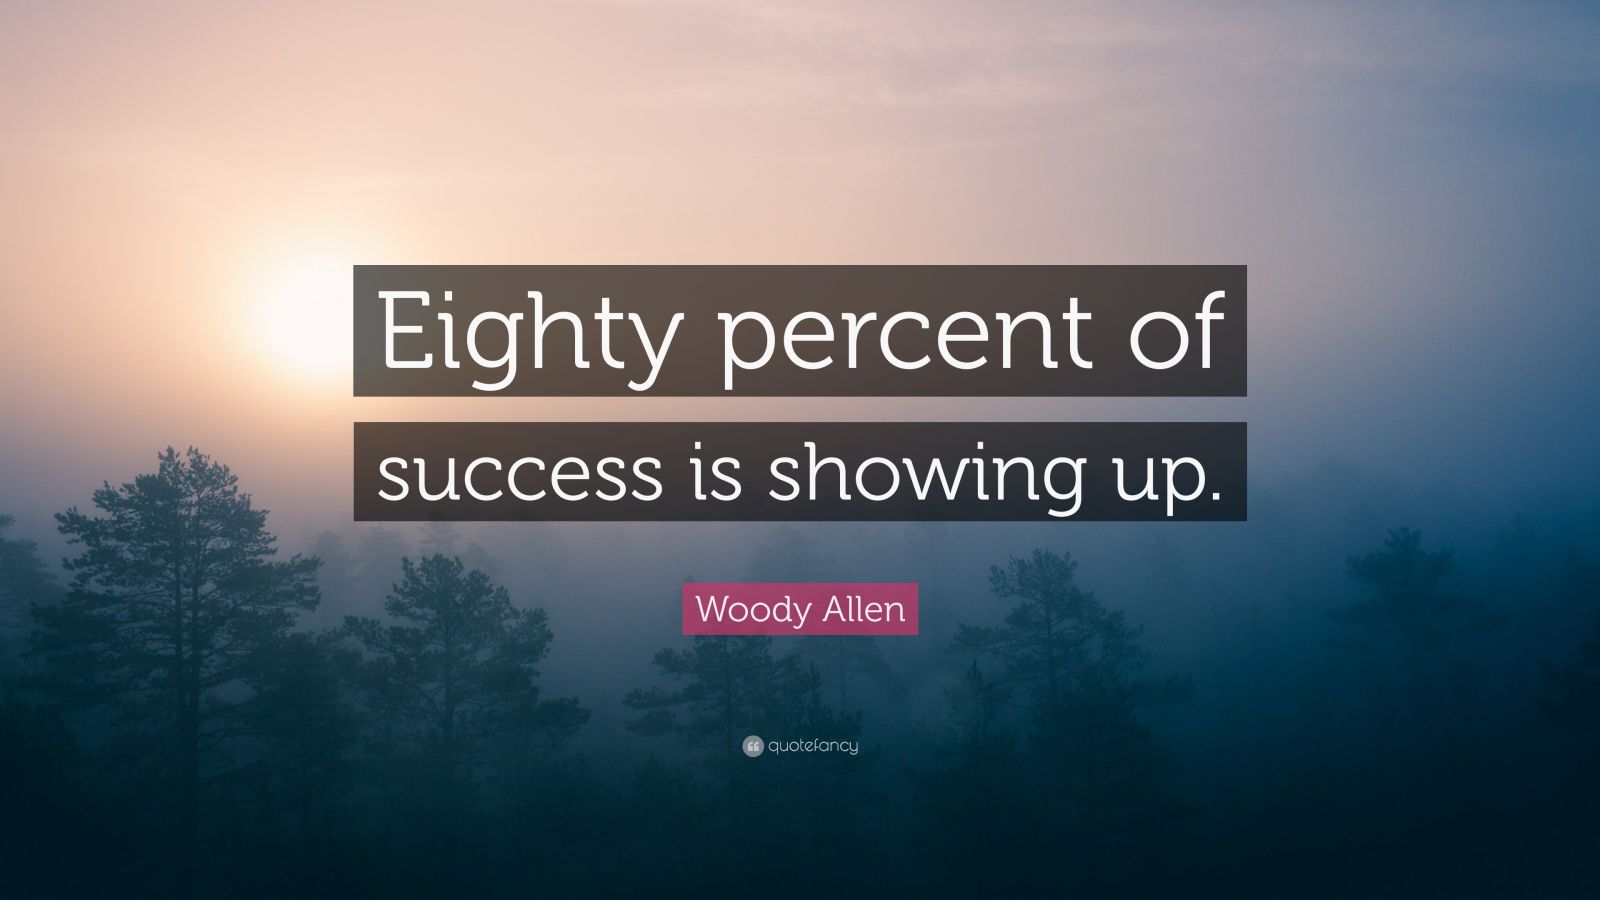 Woody Allen Quote “eighty Percent Of Success Is Showing Up” 23 Wallpapers Quotefancy 0805